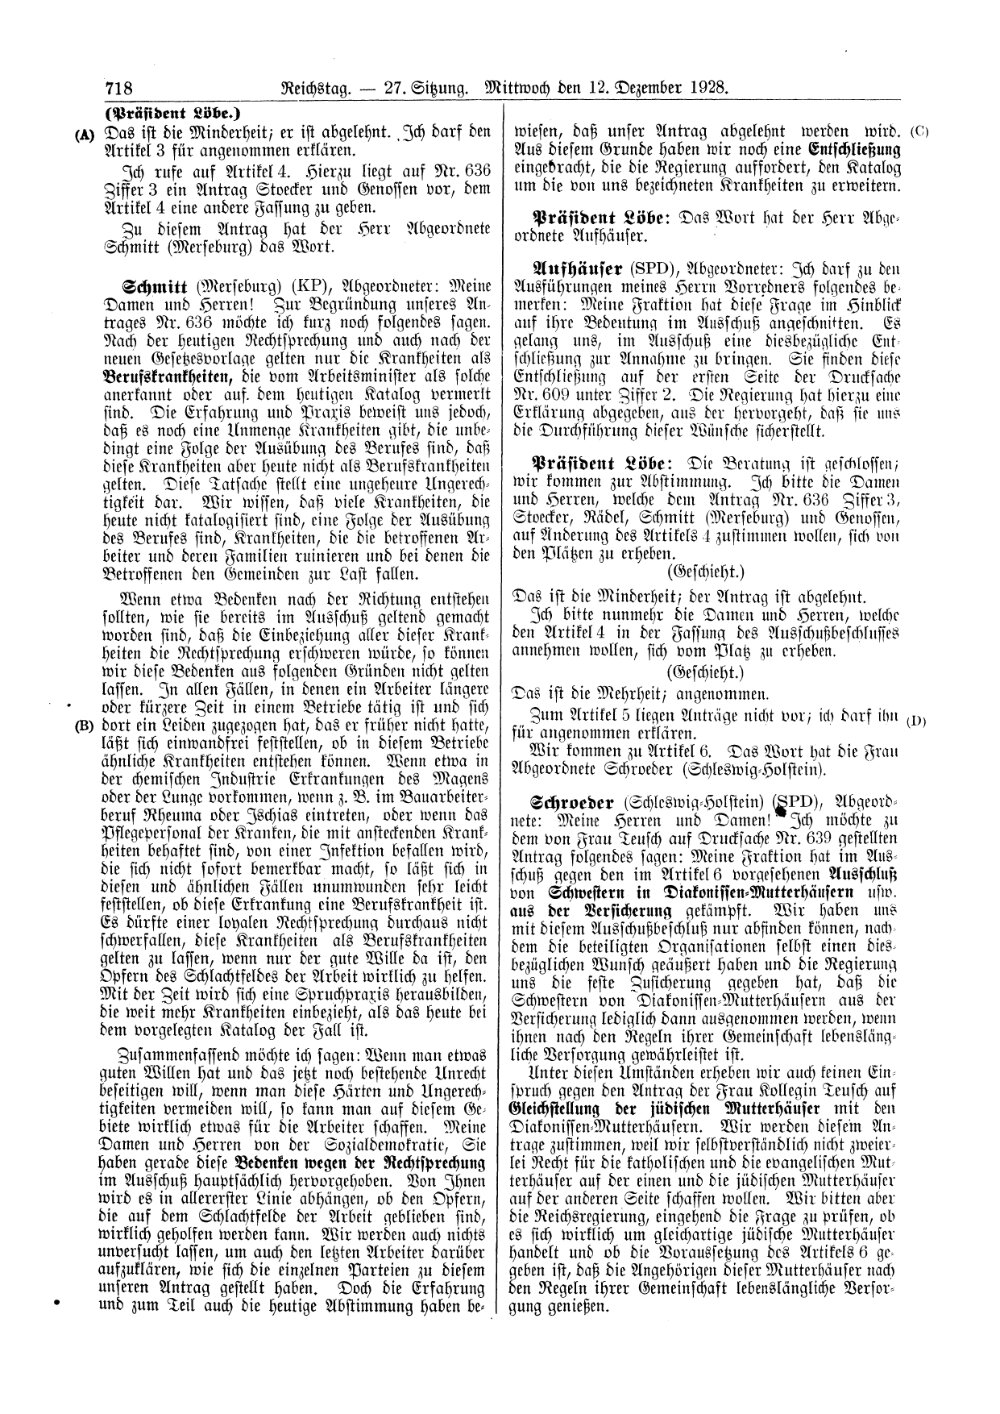 Scan of page 718